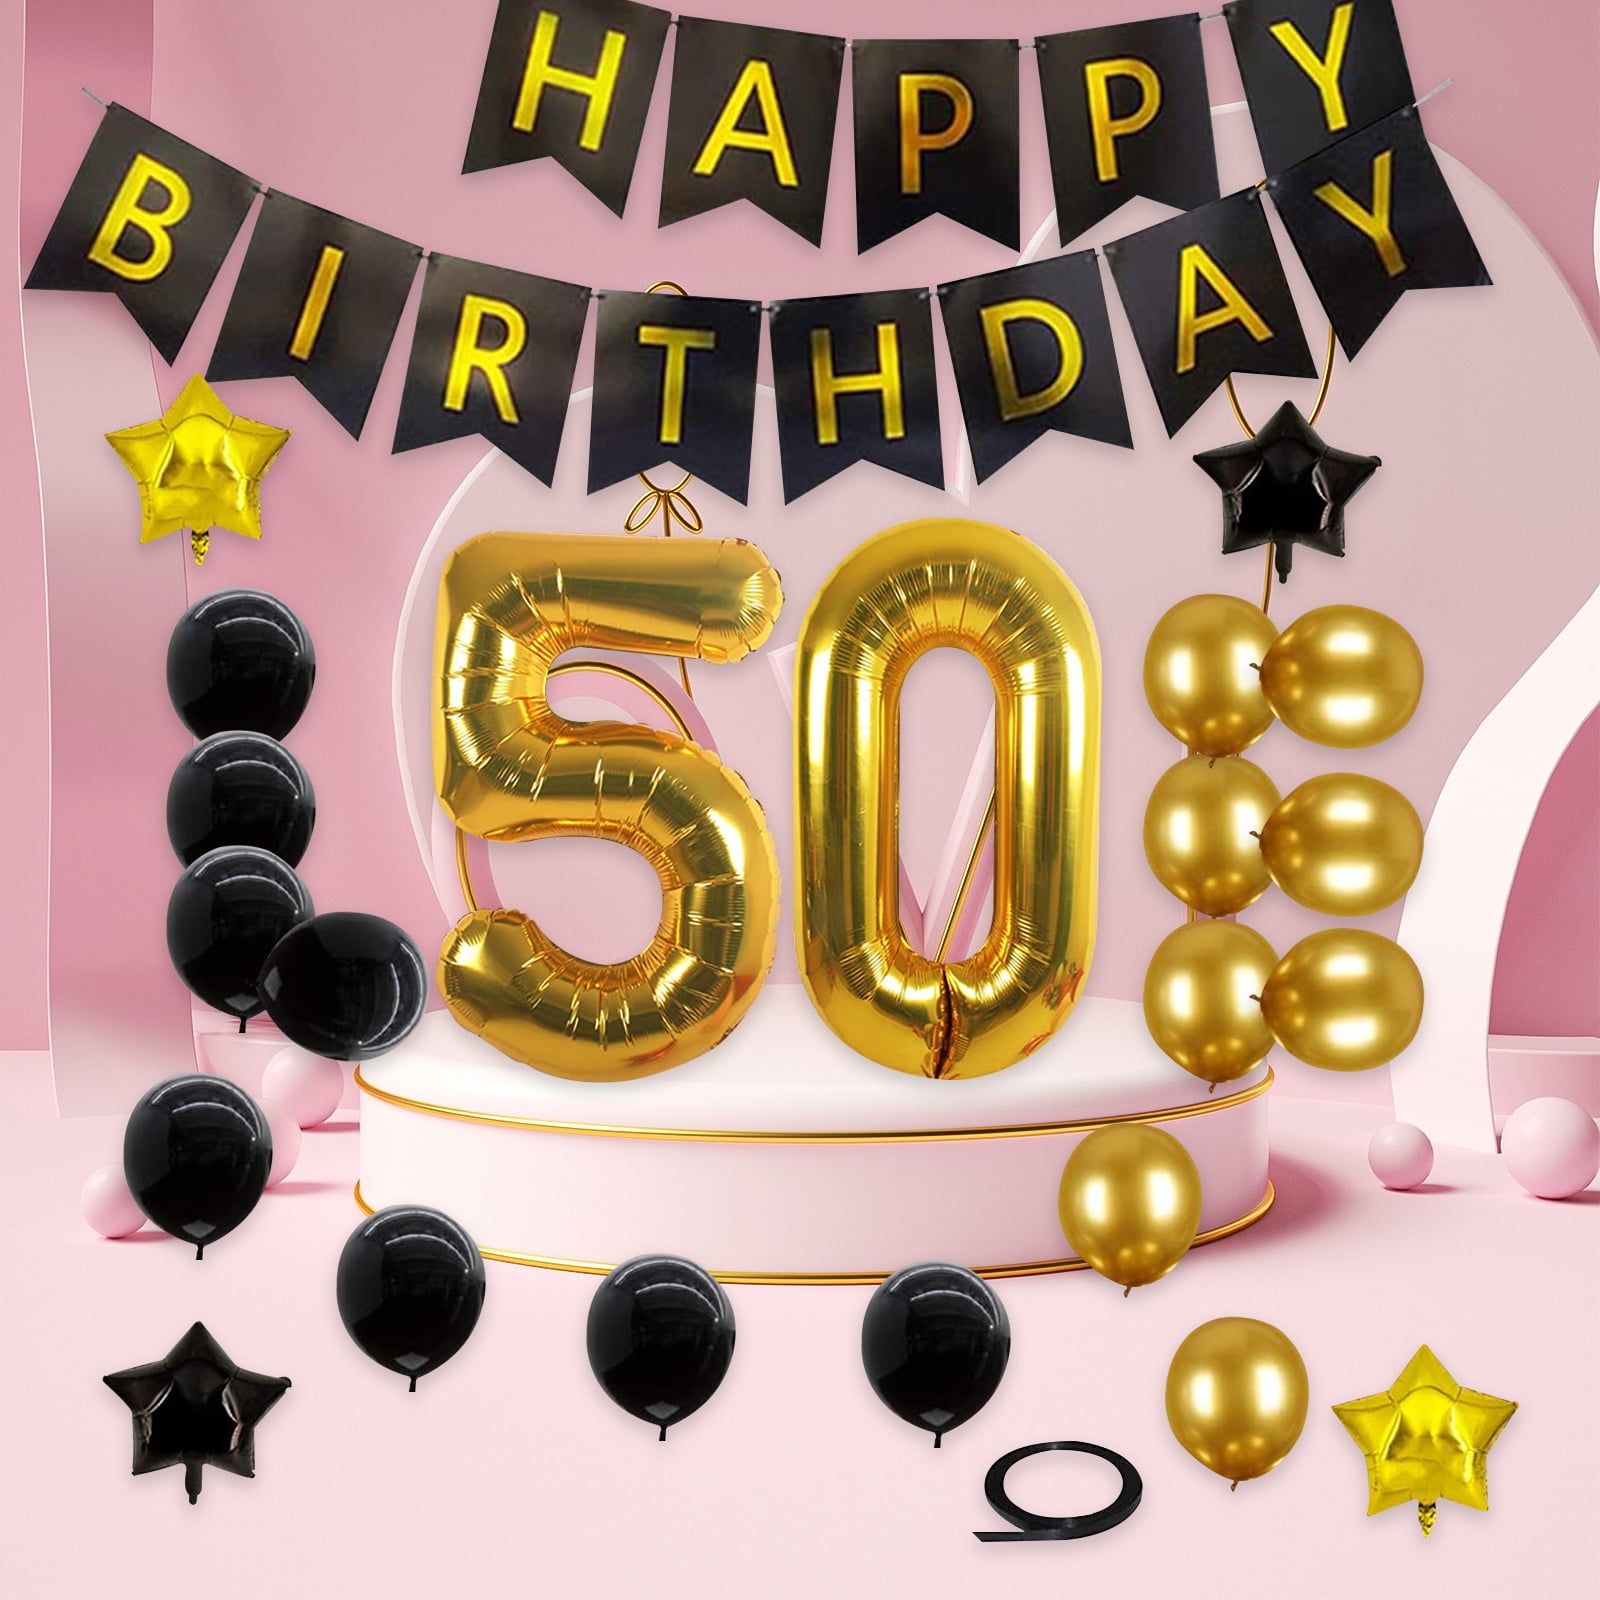 50 Year Old Birthday Party Decorations for Women Men, 24 Pack Aniversary Birthday Party Supplies Gifts for Her Him Including Happy Birthday Banner, Black&Golden Balloons and Tape - Walmart.com